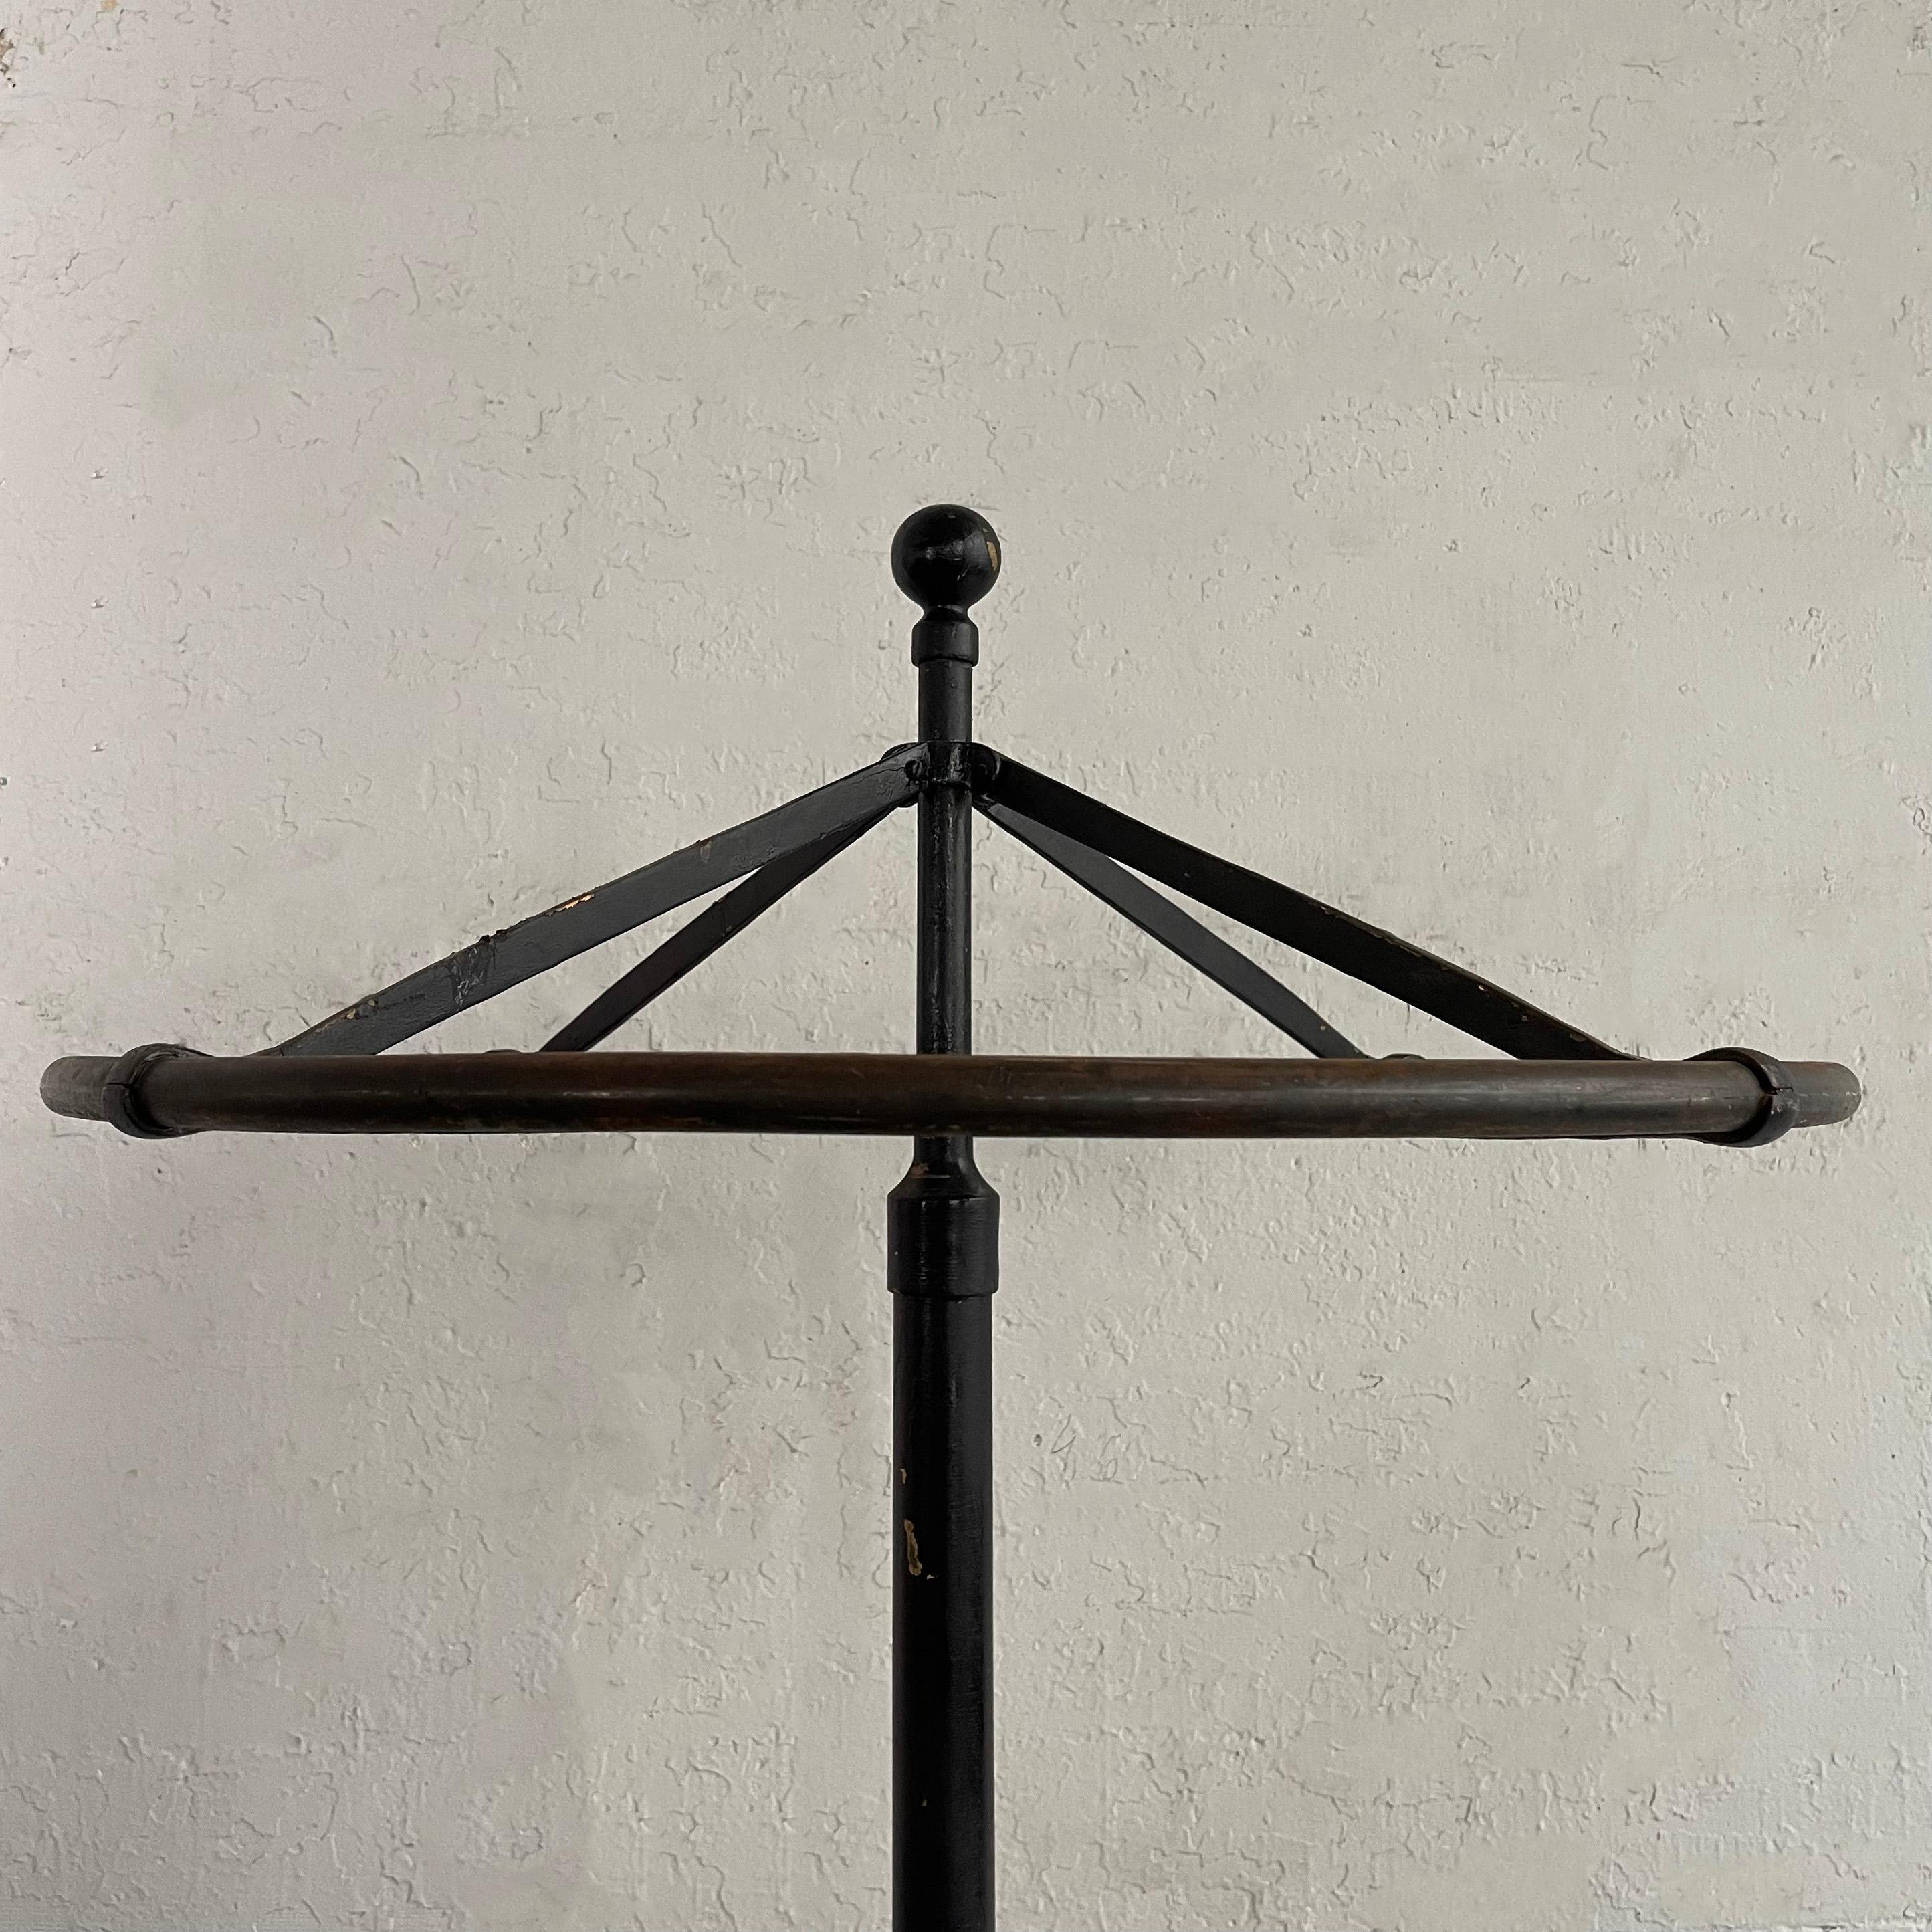 American Early 20th Century Ornate Cast Iron Rounder Garment Rack